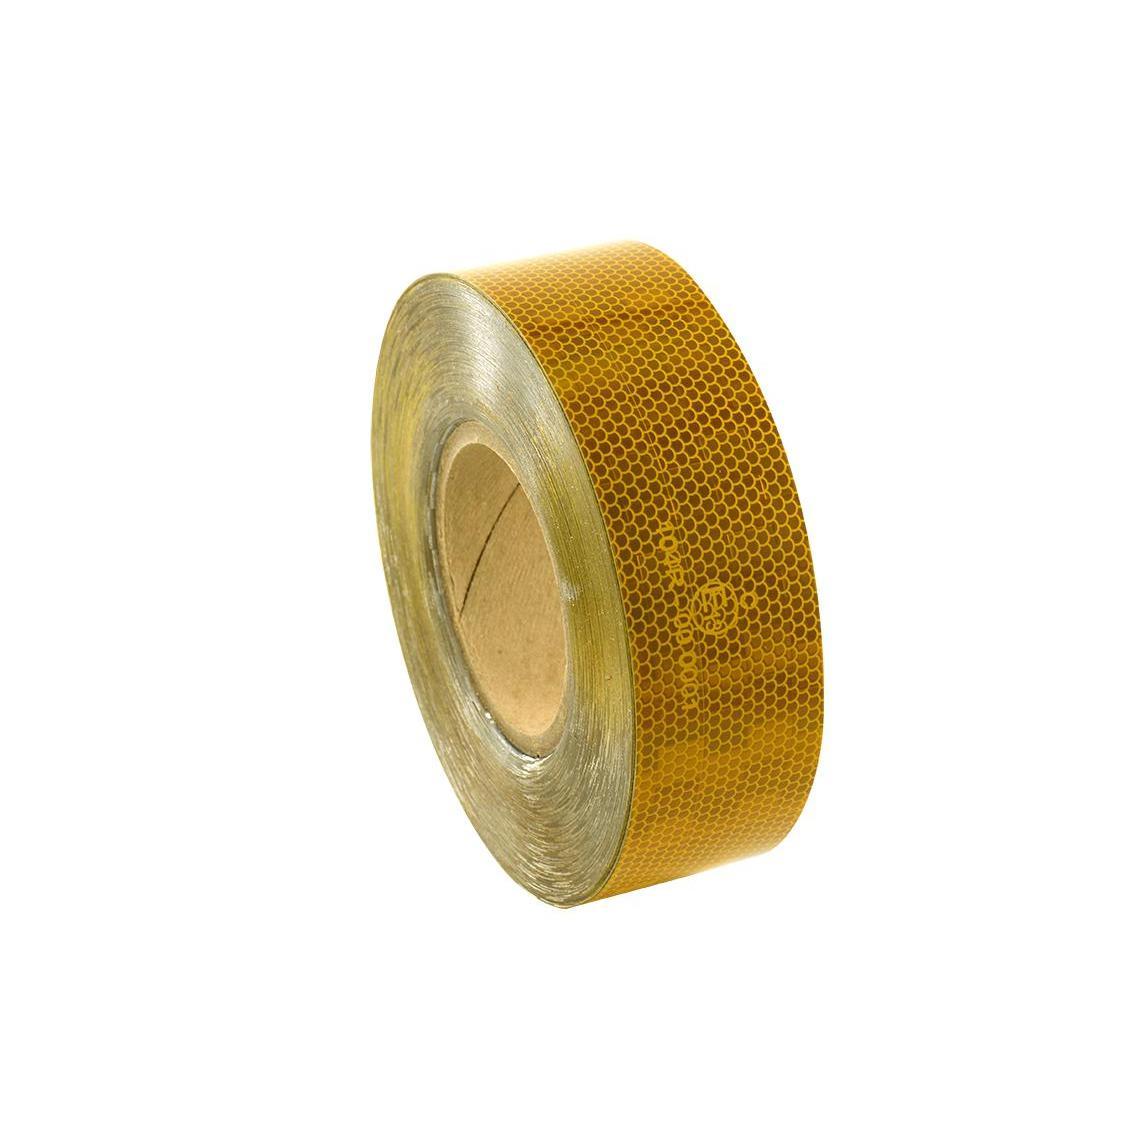 Reflective Conspicuity Tape Non-SABS p/meter-Hardware Tape-MTS-50mm-Yellow-diyshop.co.za